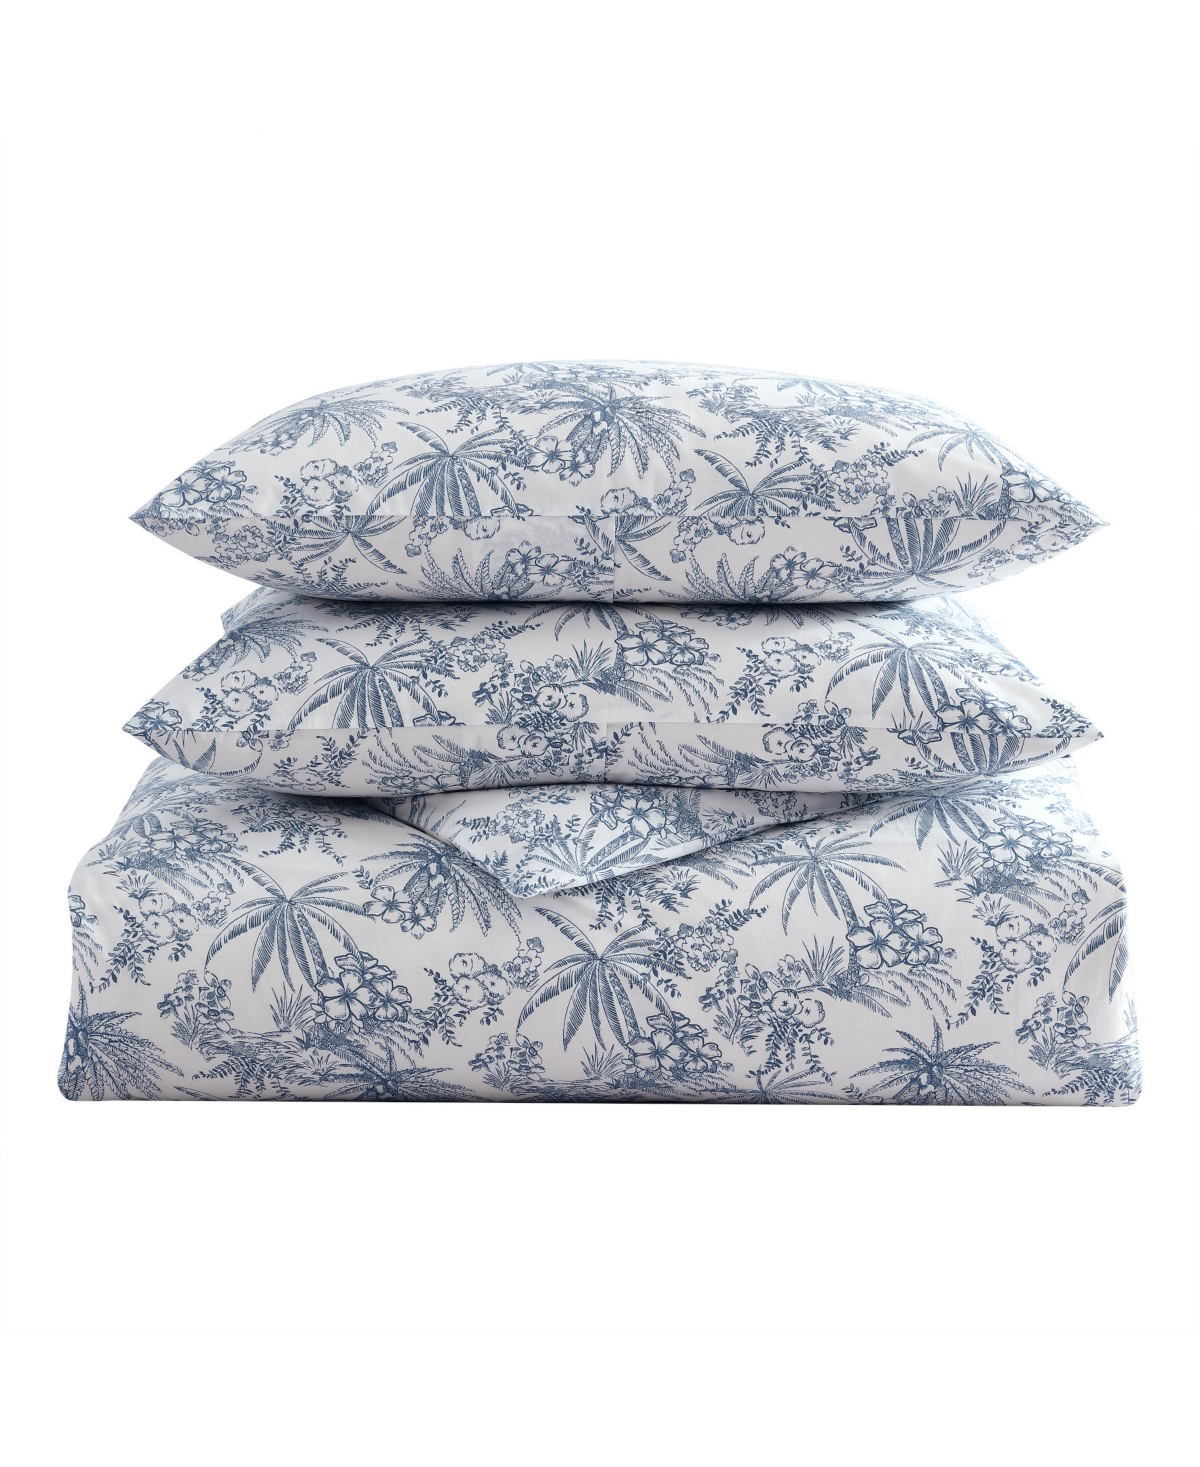 Tommy Bahama Home Pen And Ink Cotton 3 Piece Duvet Cover Set, Full/queen In Indigo